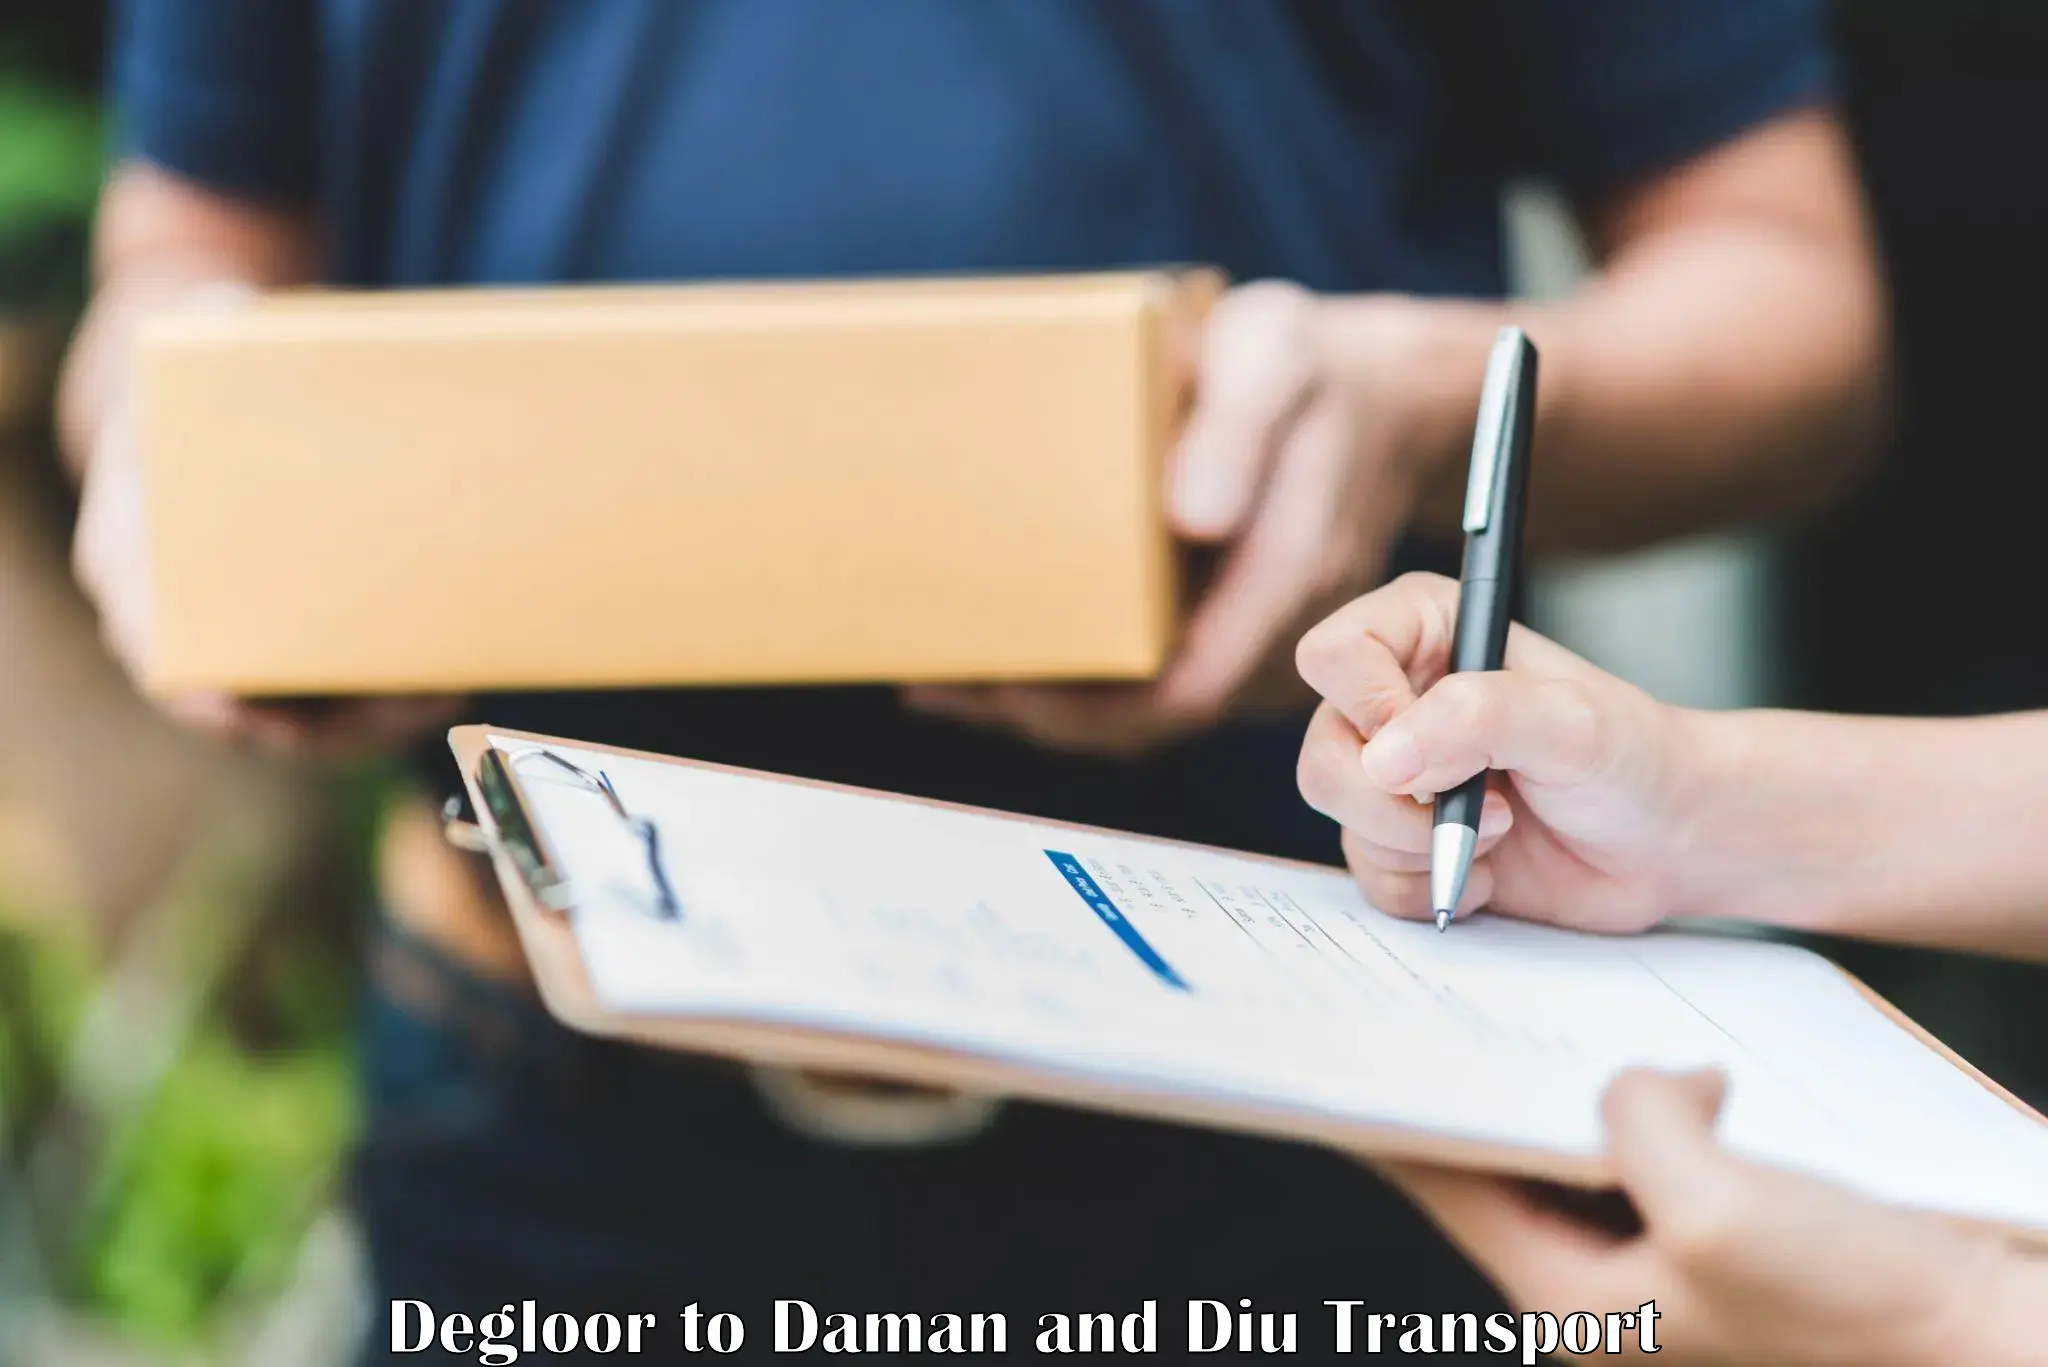 Domestic goods transportation services Degloor to Daman and Diu